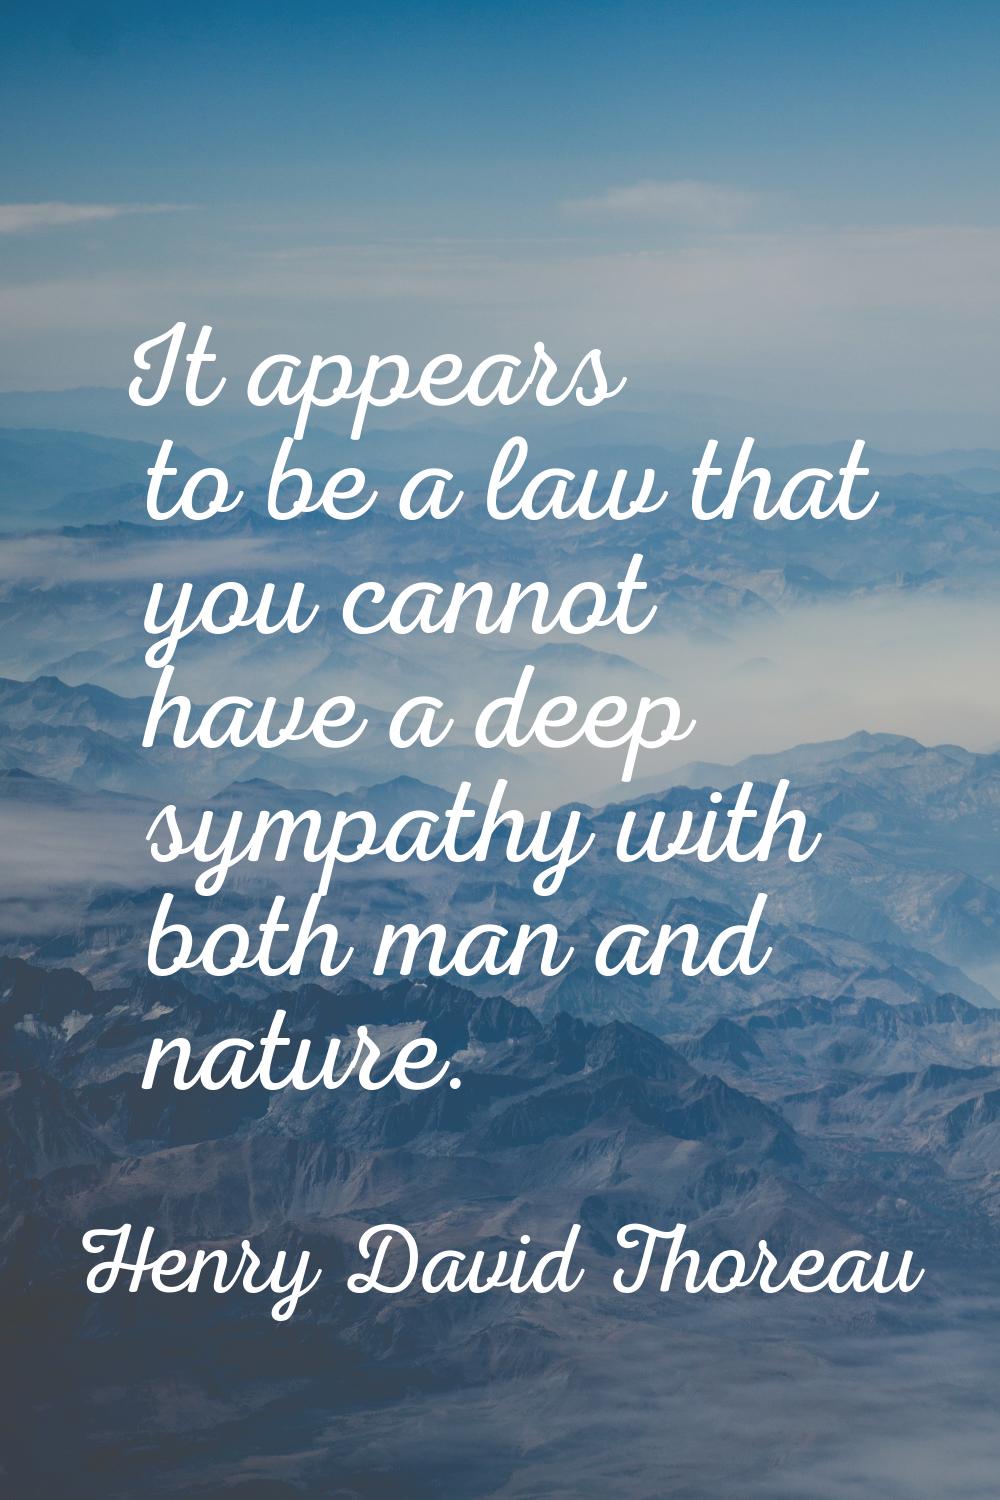 It appears to be a law that you cannot have a deep sympathy with both man and nature.